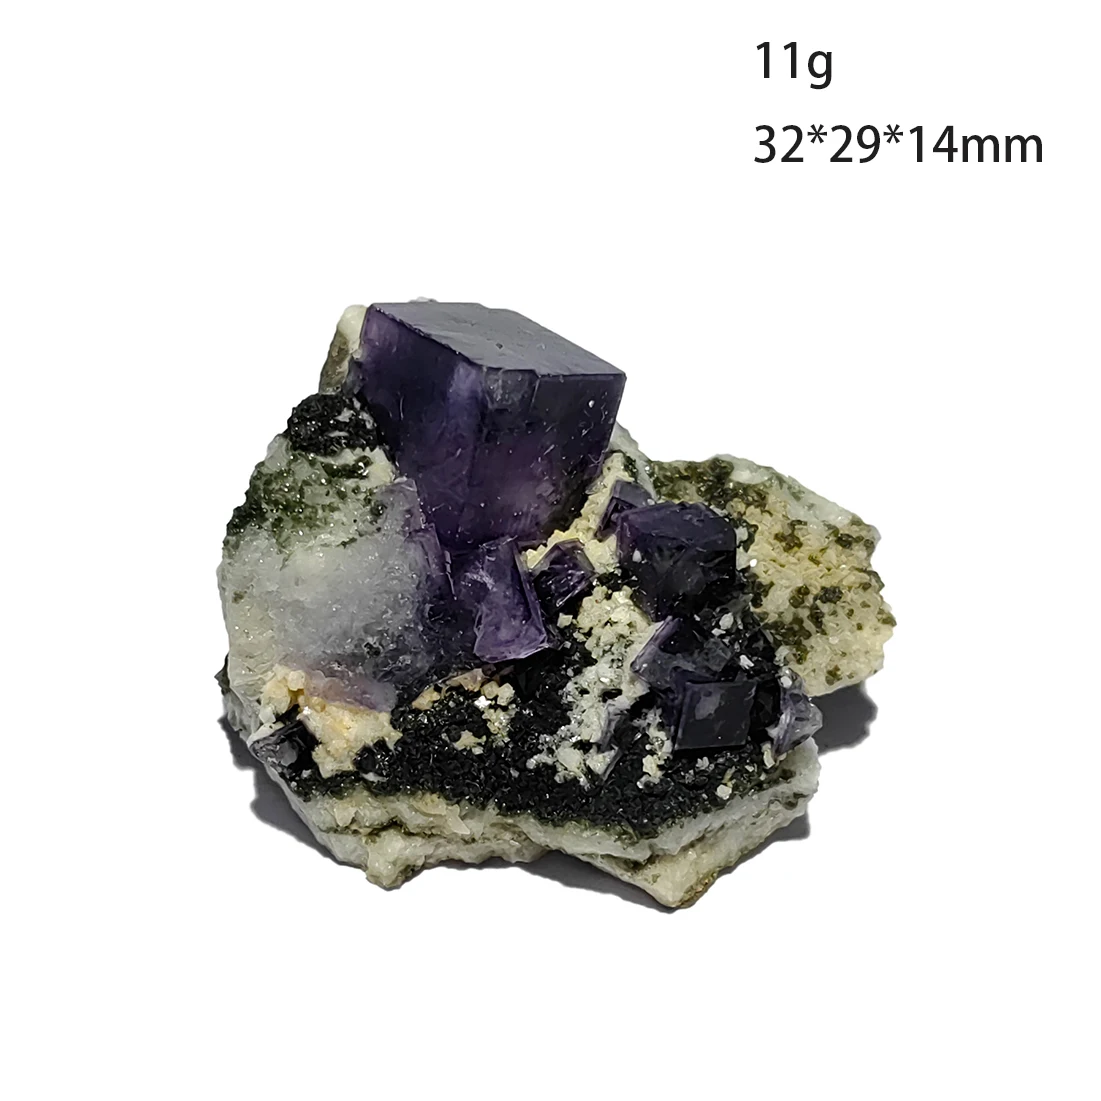 

C5-7B Natural Fluorite Mica Mineral Crystal Specimen From Yaogangxian Hunan Province China